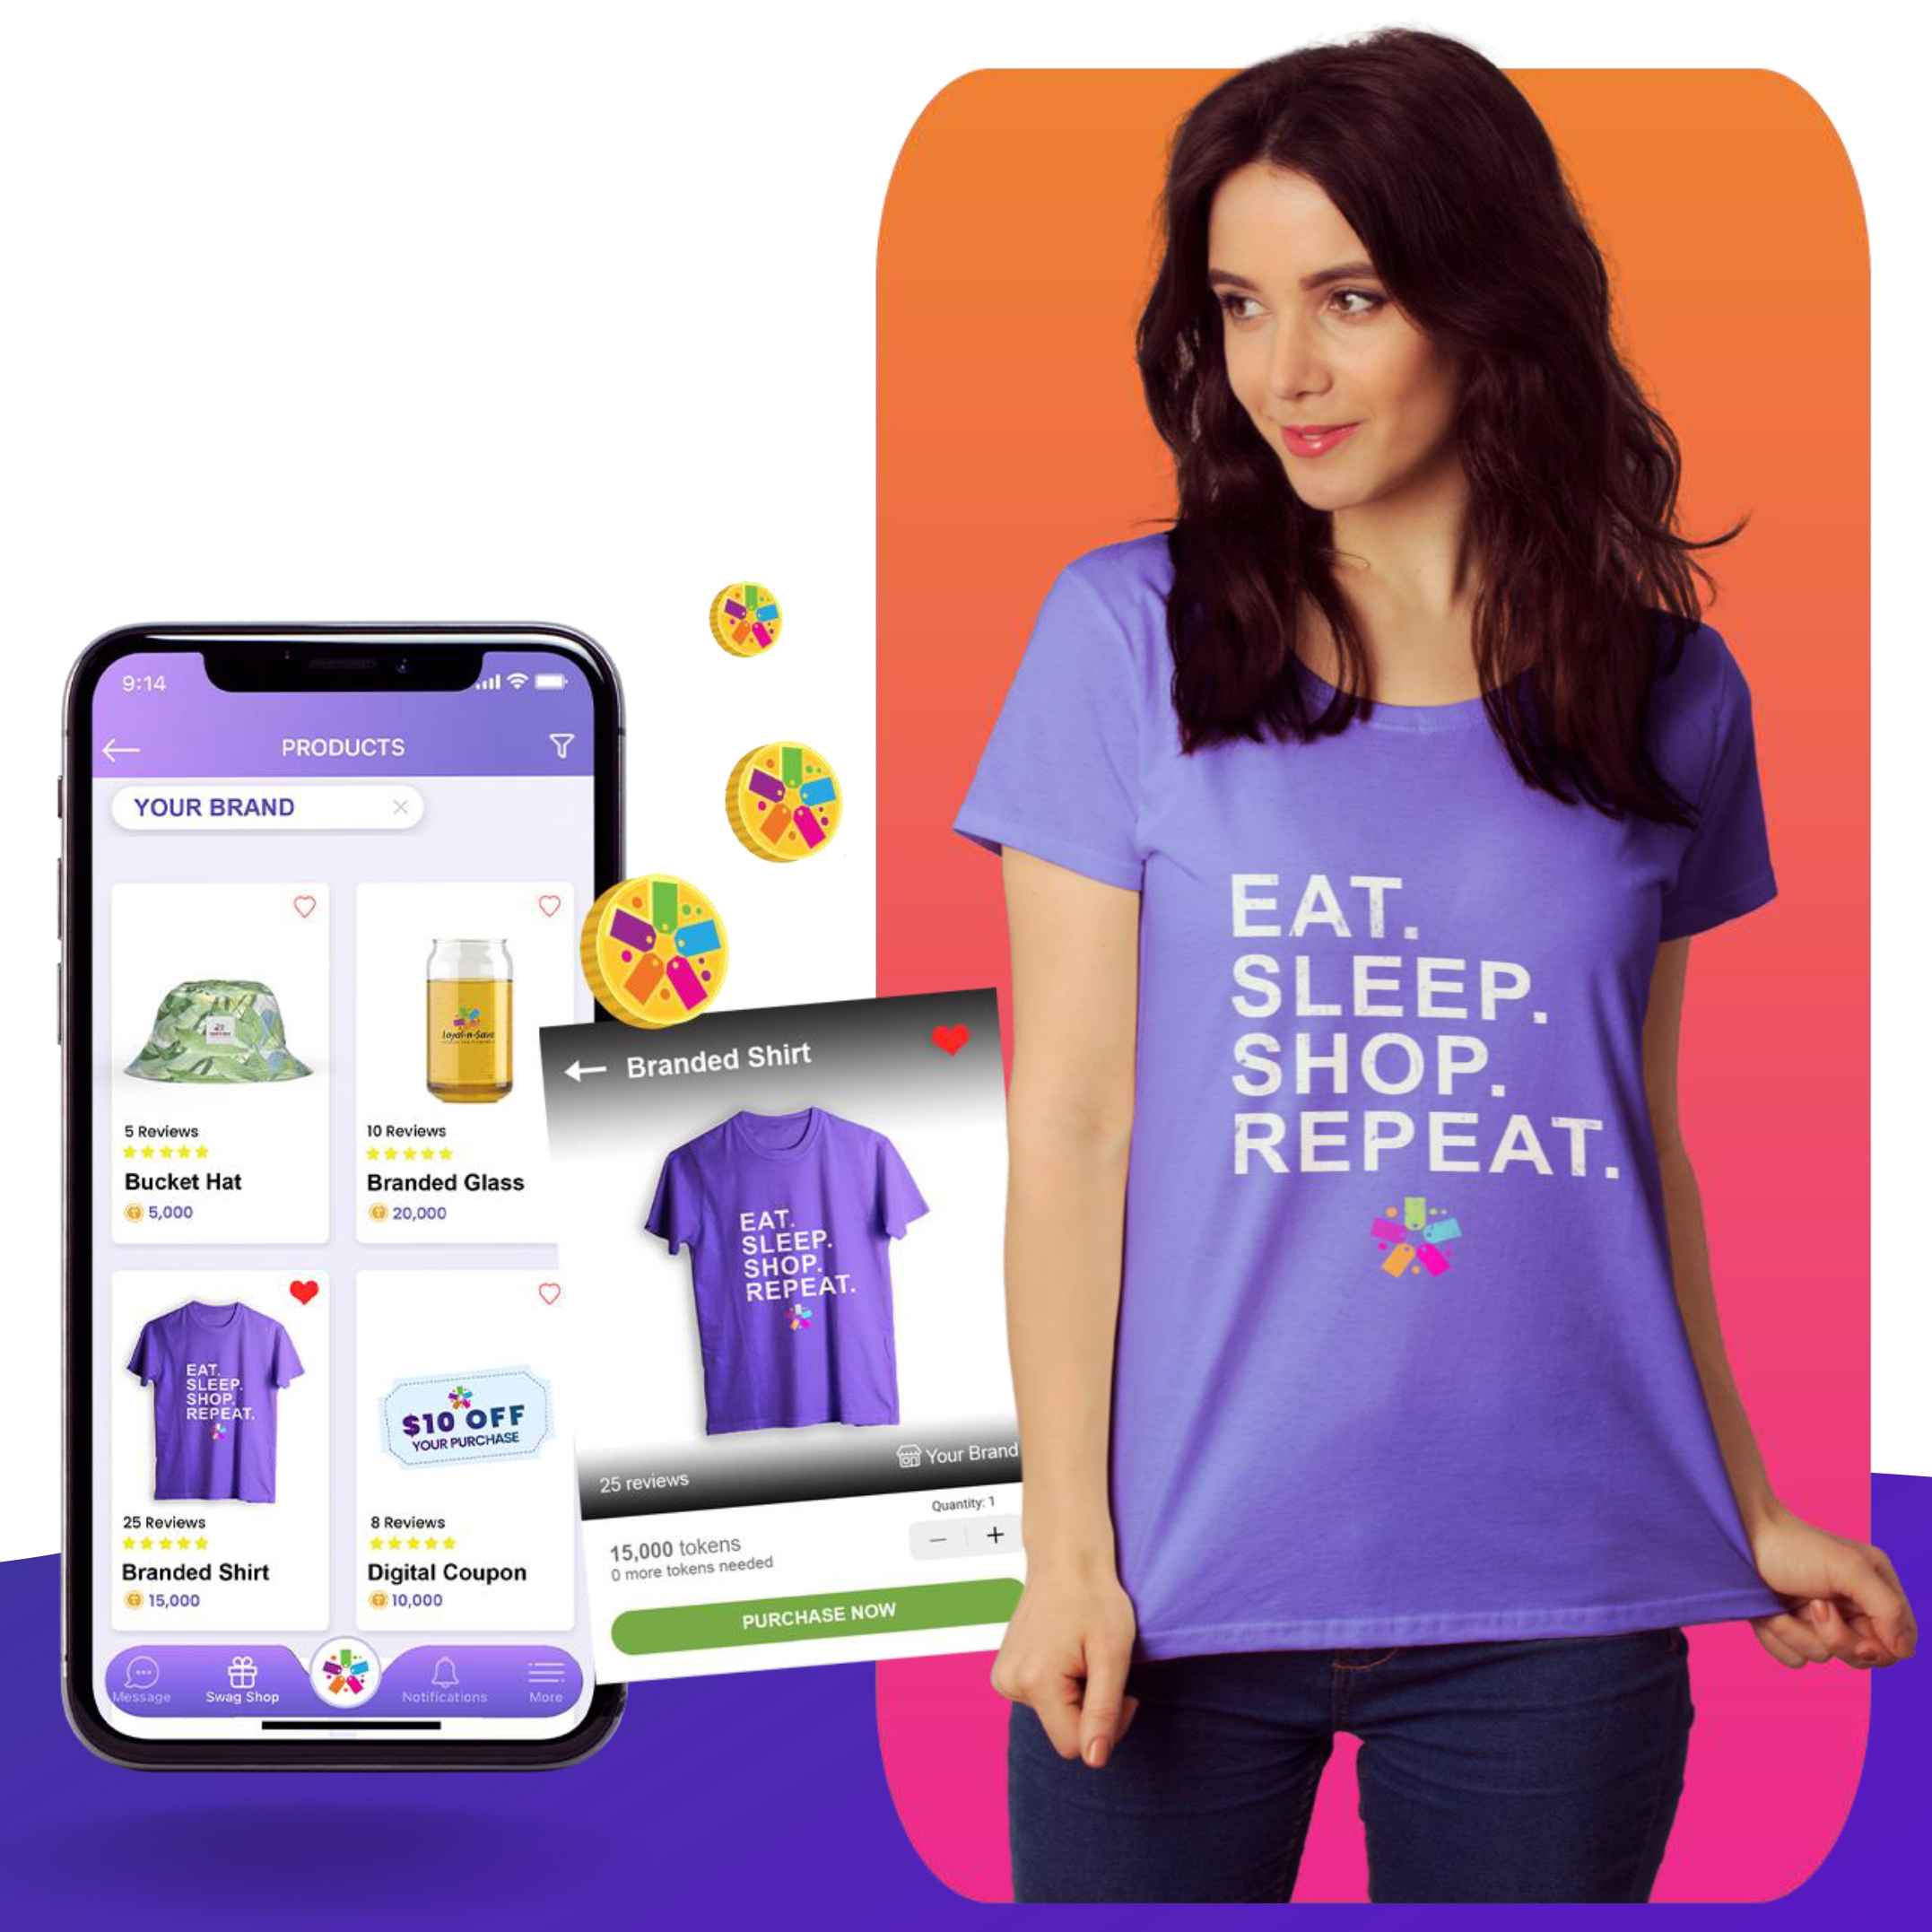 Loyal customers can trade reward tokens for exclusive items, such as branded swag and popular products. Include special discount offers for top customers, and build brand ambassadors.